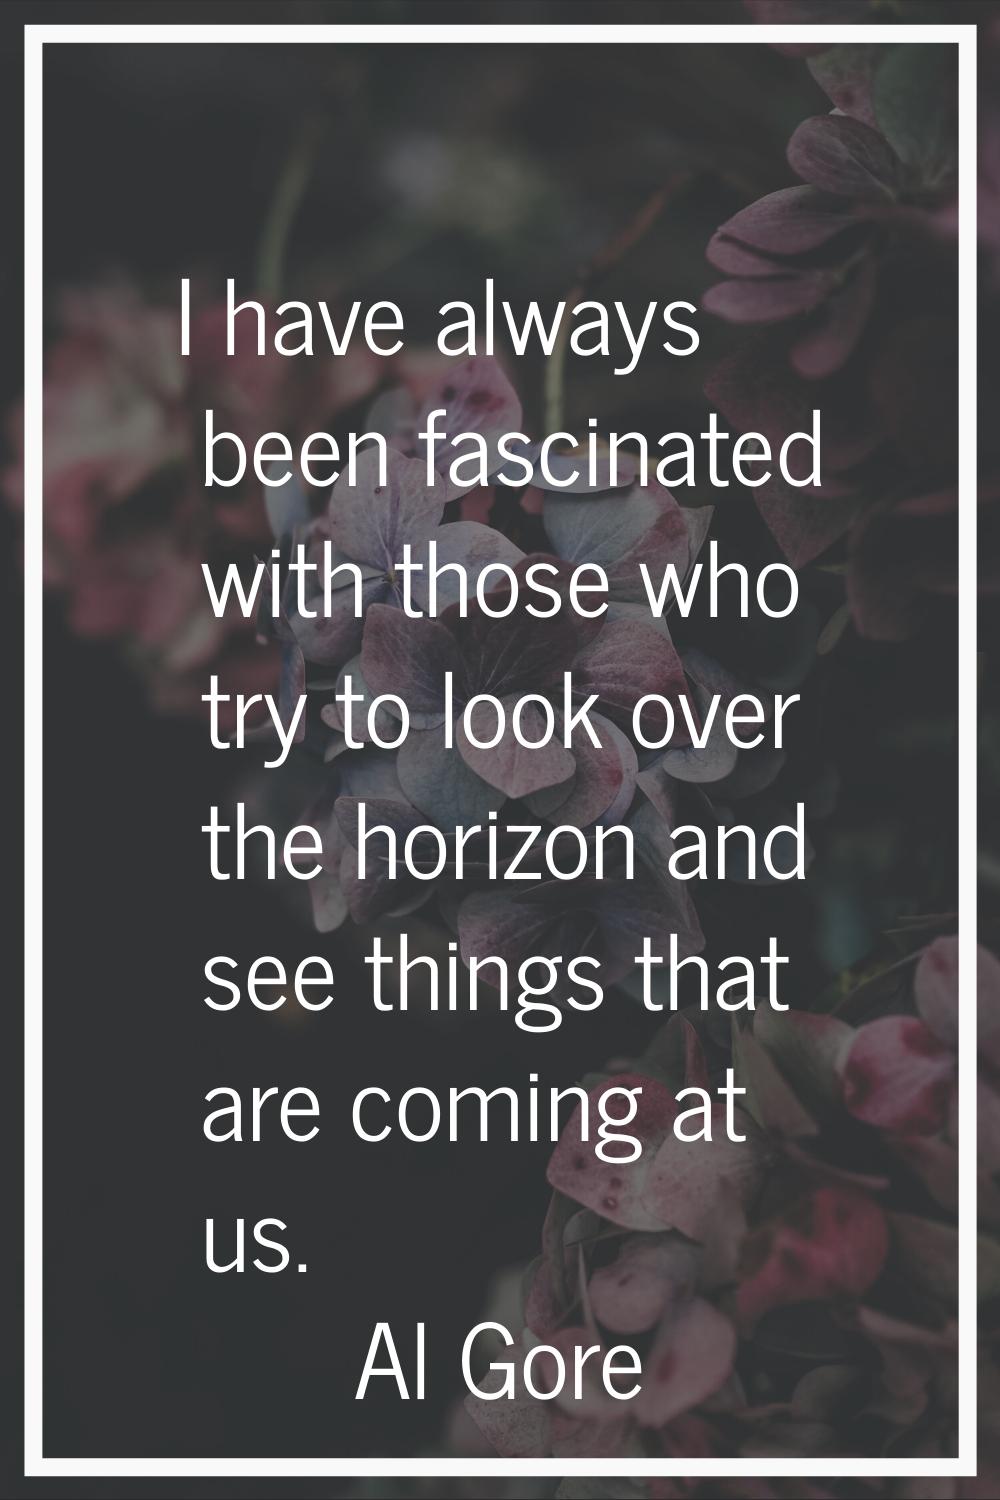 I have always been fascinated with those who try to look over the horizon and see things that are c